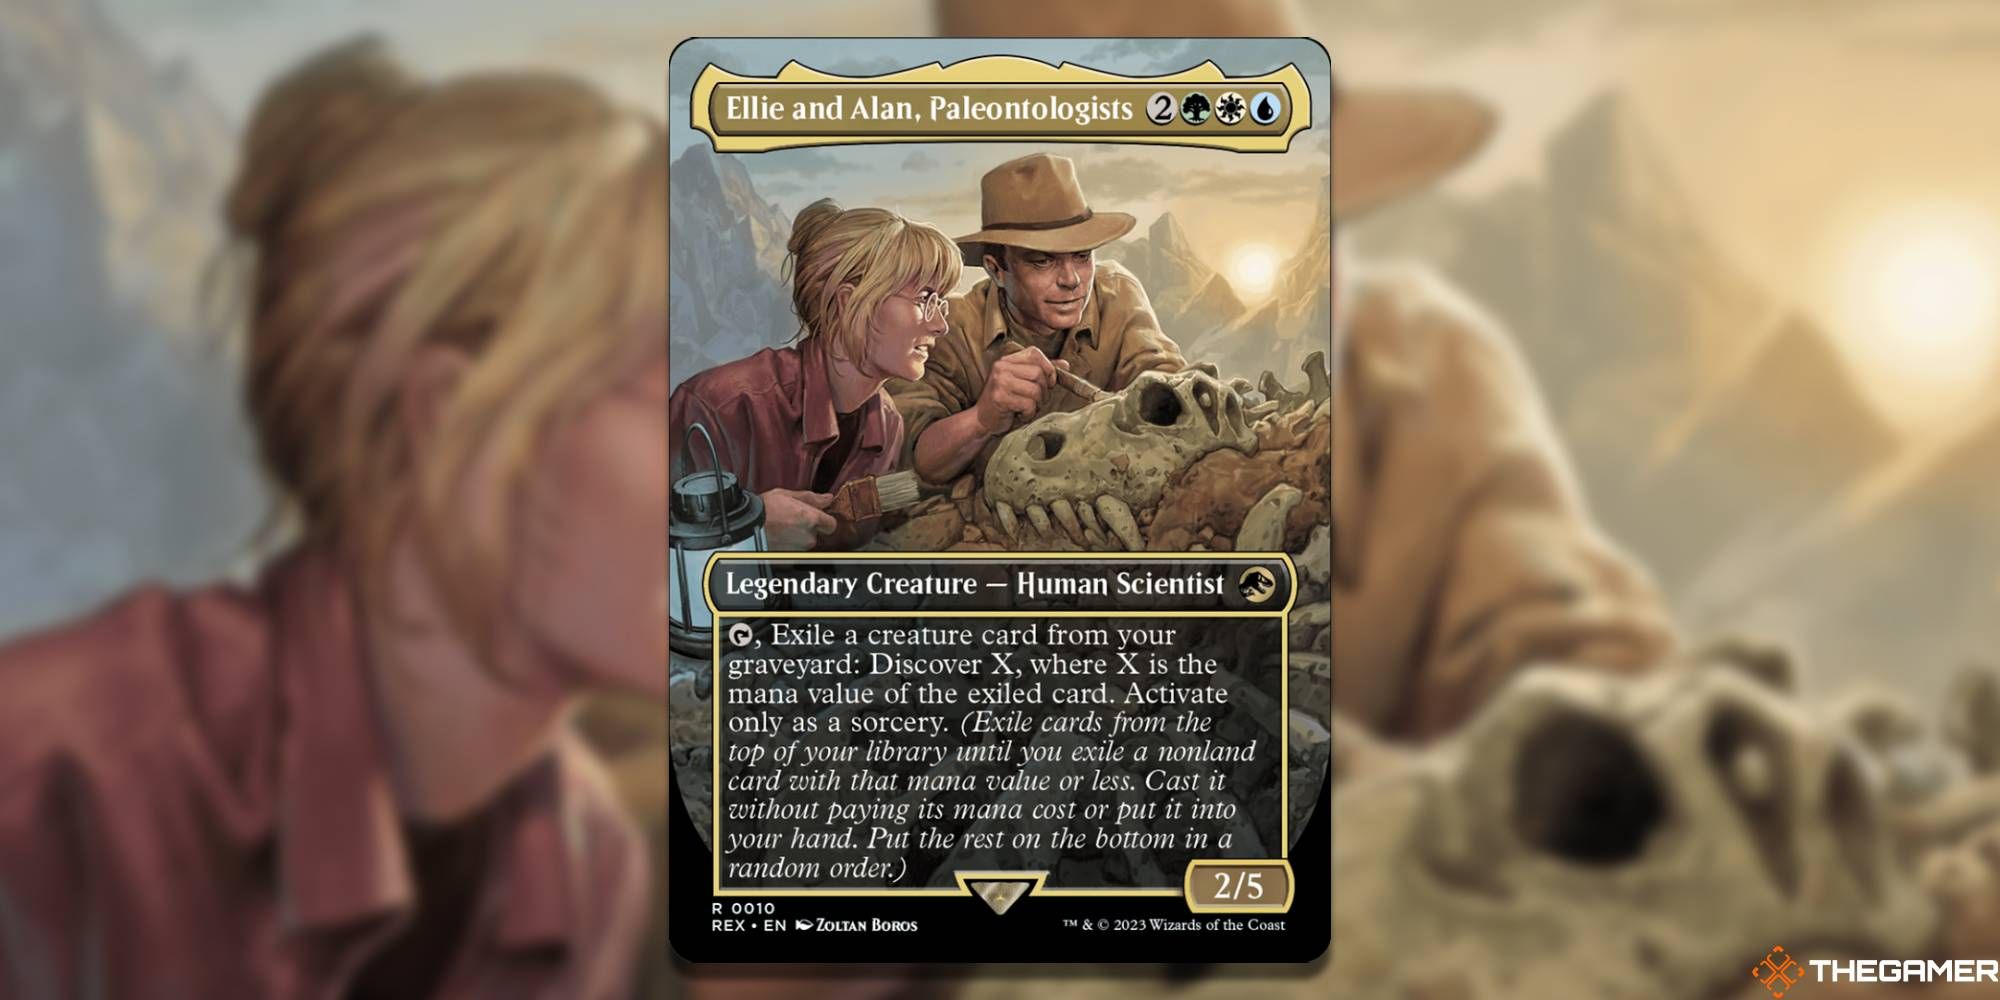 Ellie and Alan, Paleontologists by Zoltan Boros